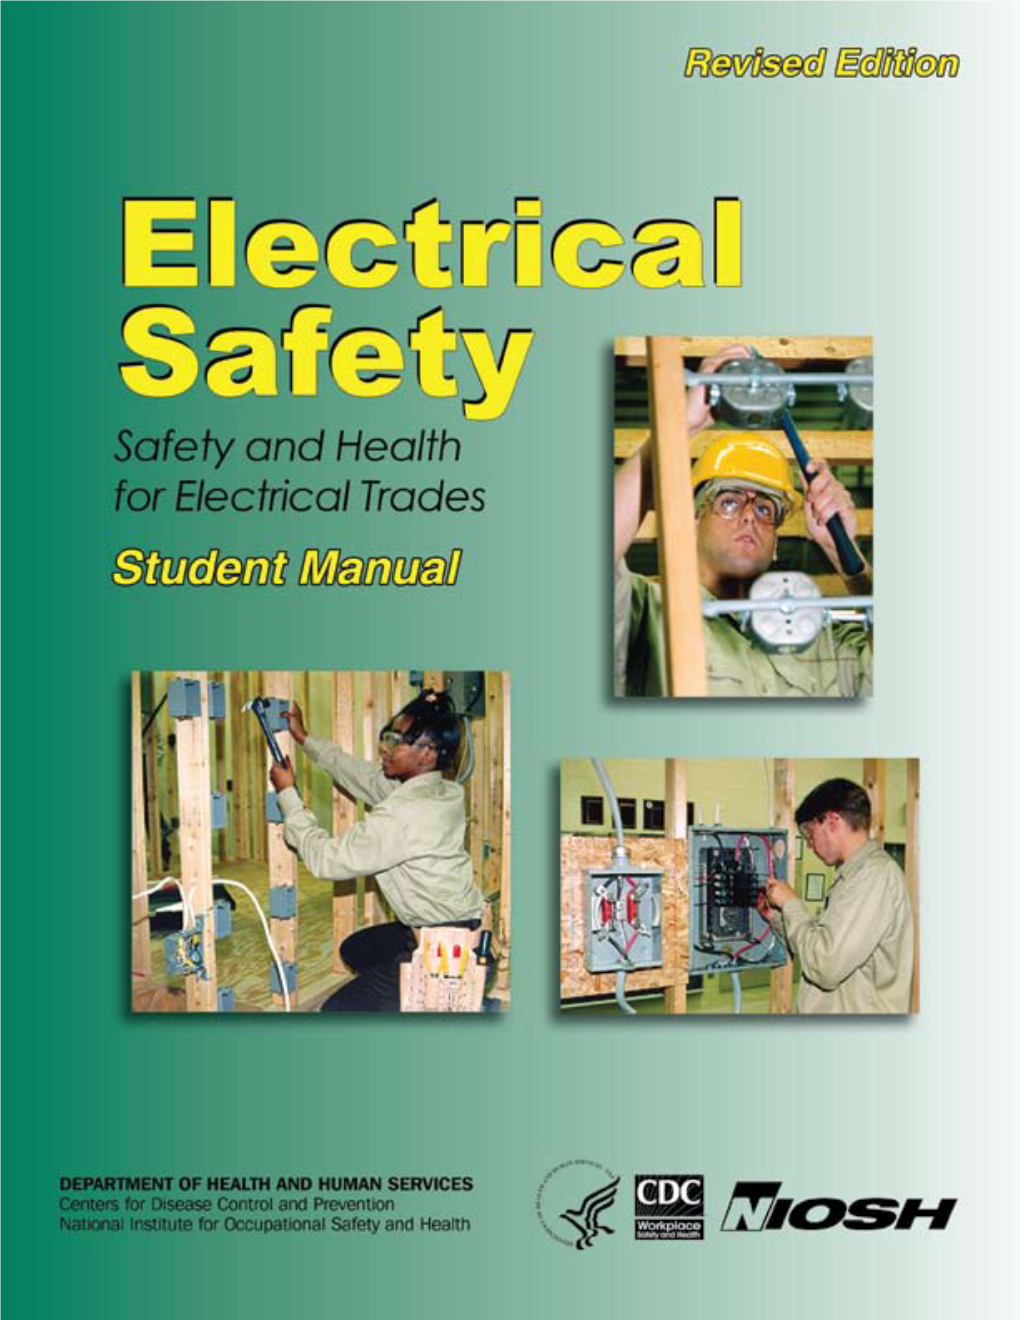 Safety and Health for Electrical Trades. Student Manual